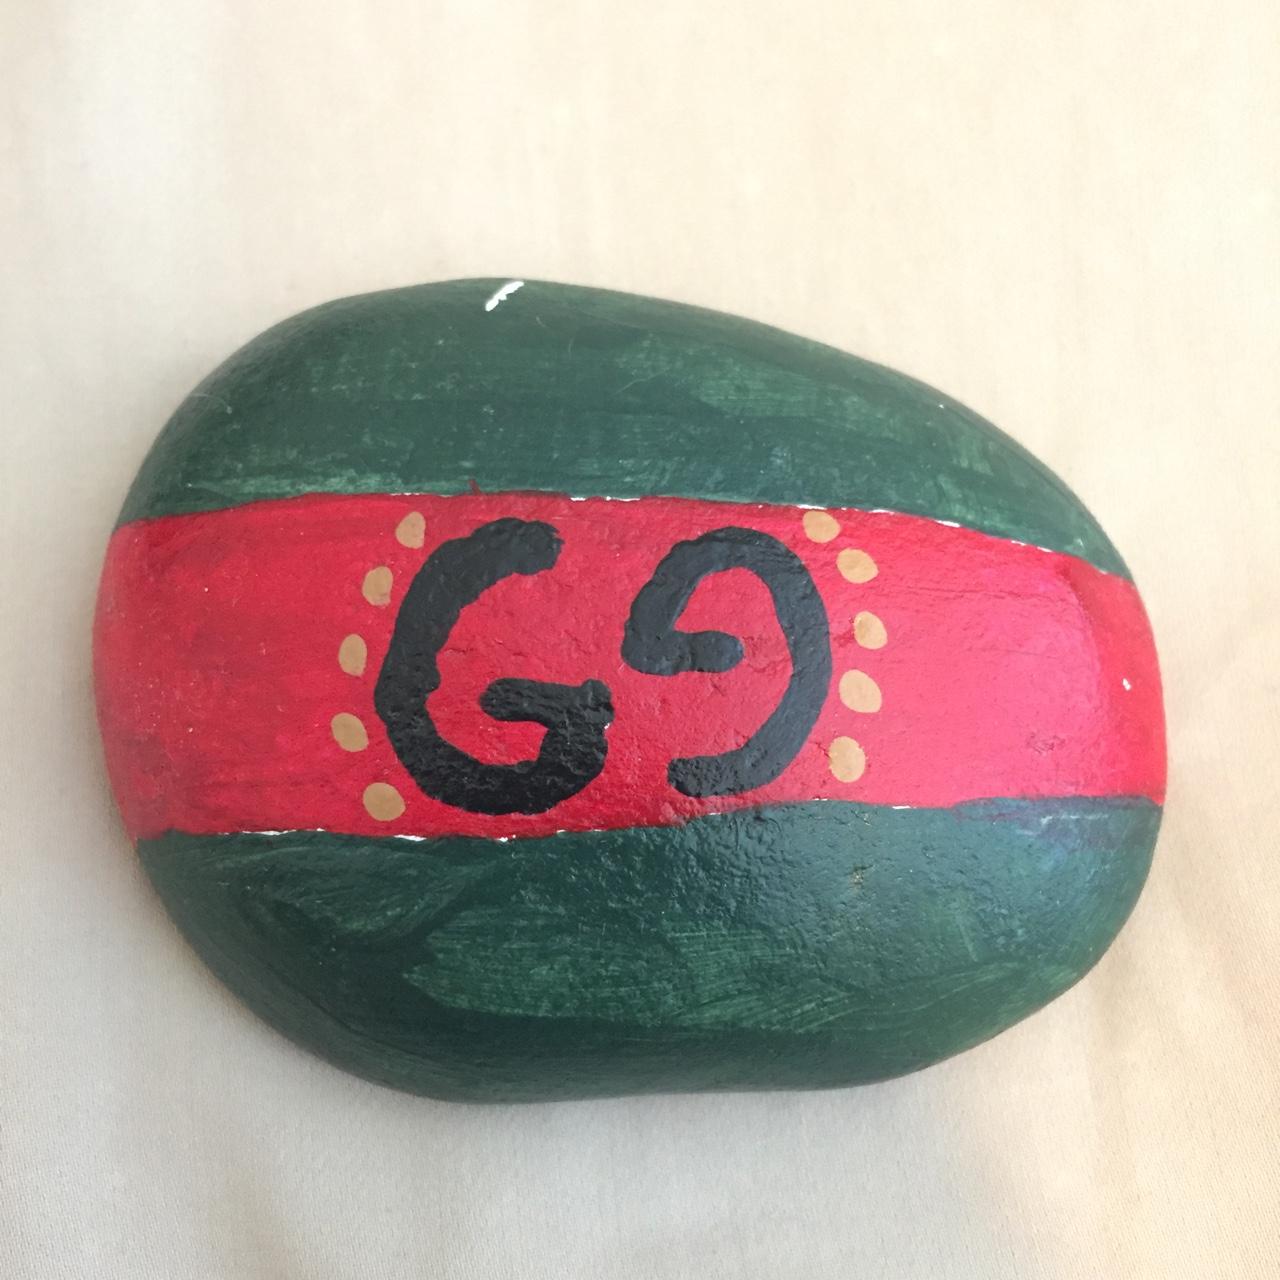 Gucci Rock. It is Handcrafted, Throw me offers.